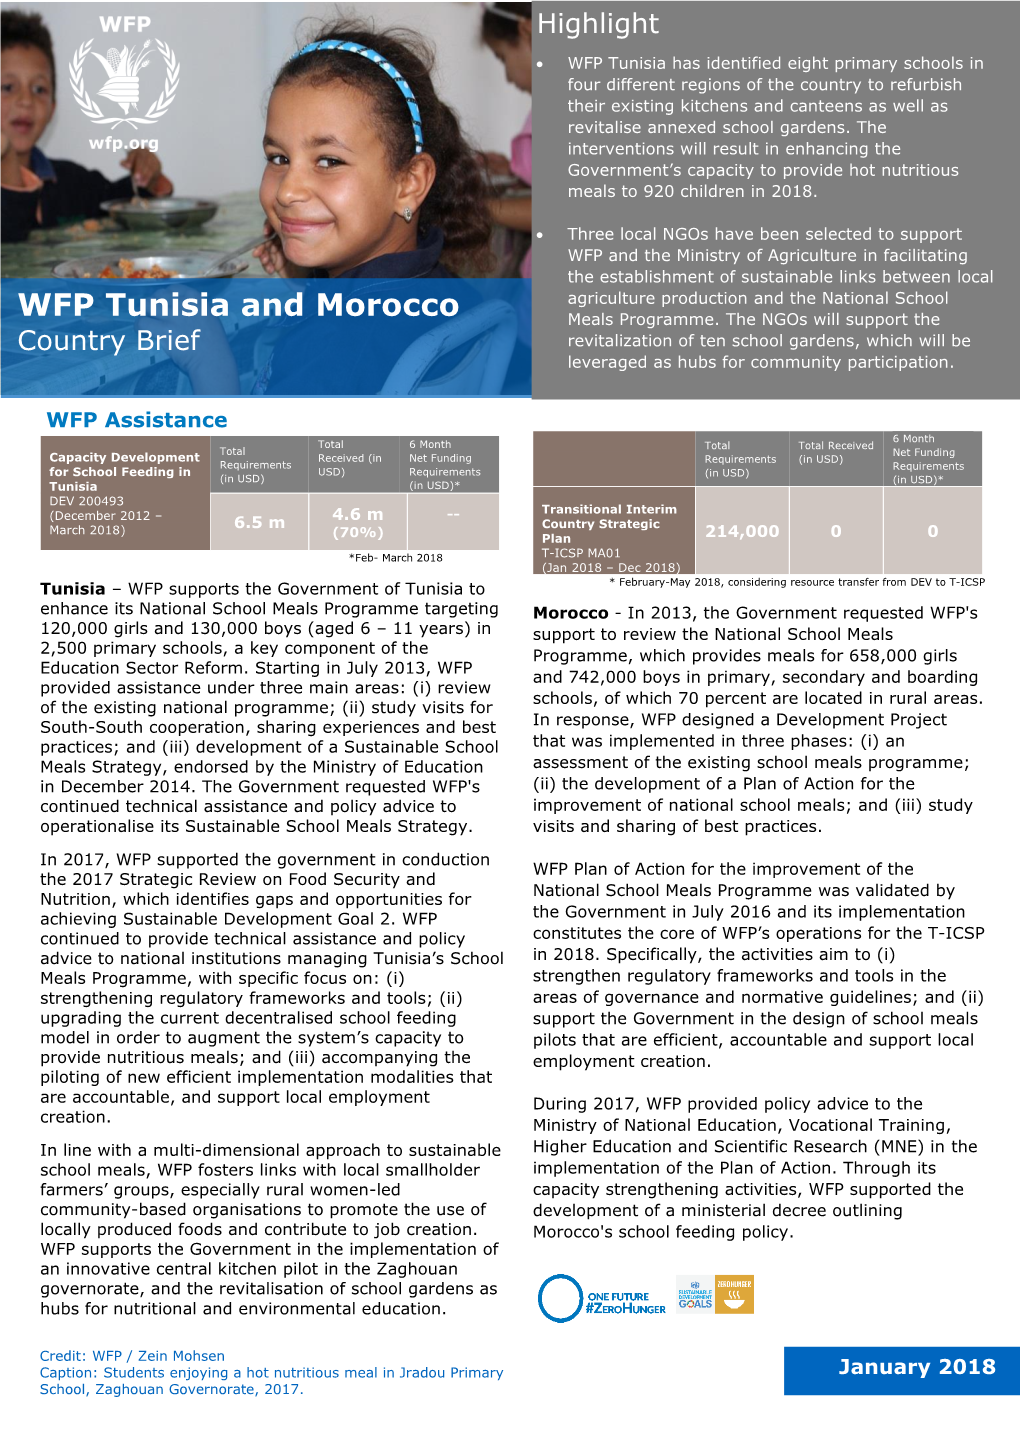 WFP Tunisia and Morocco Meals Programme